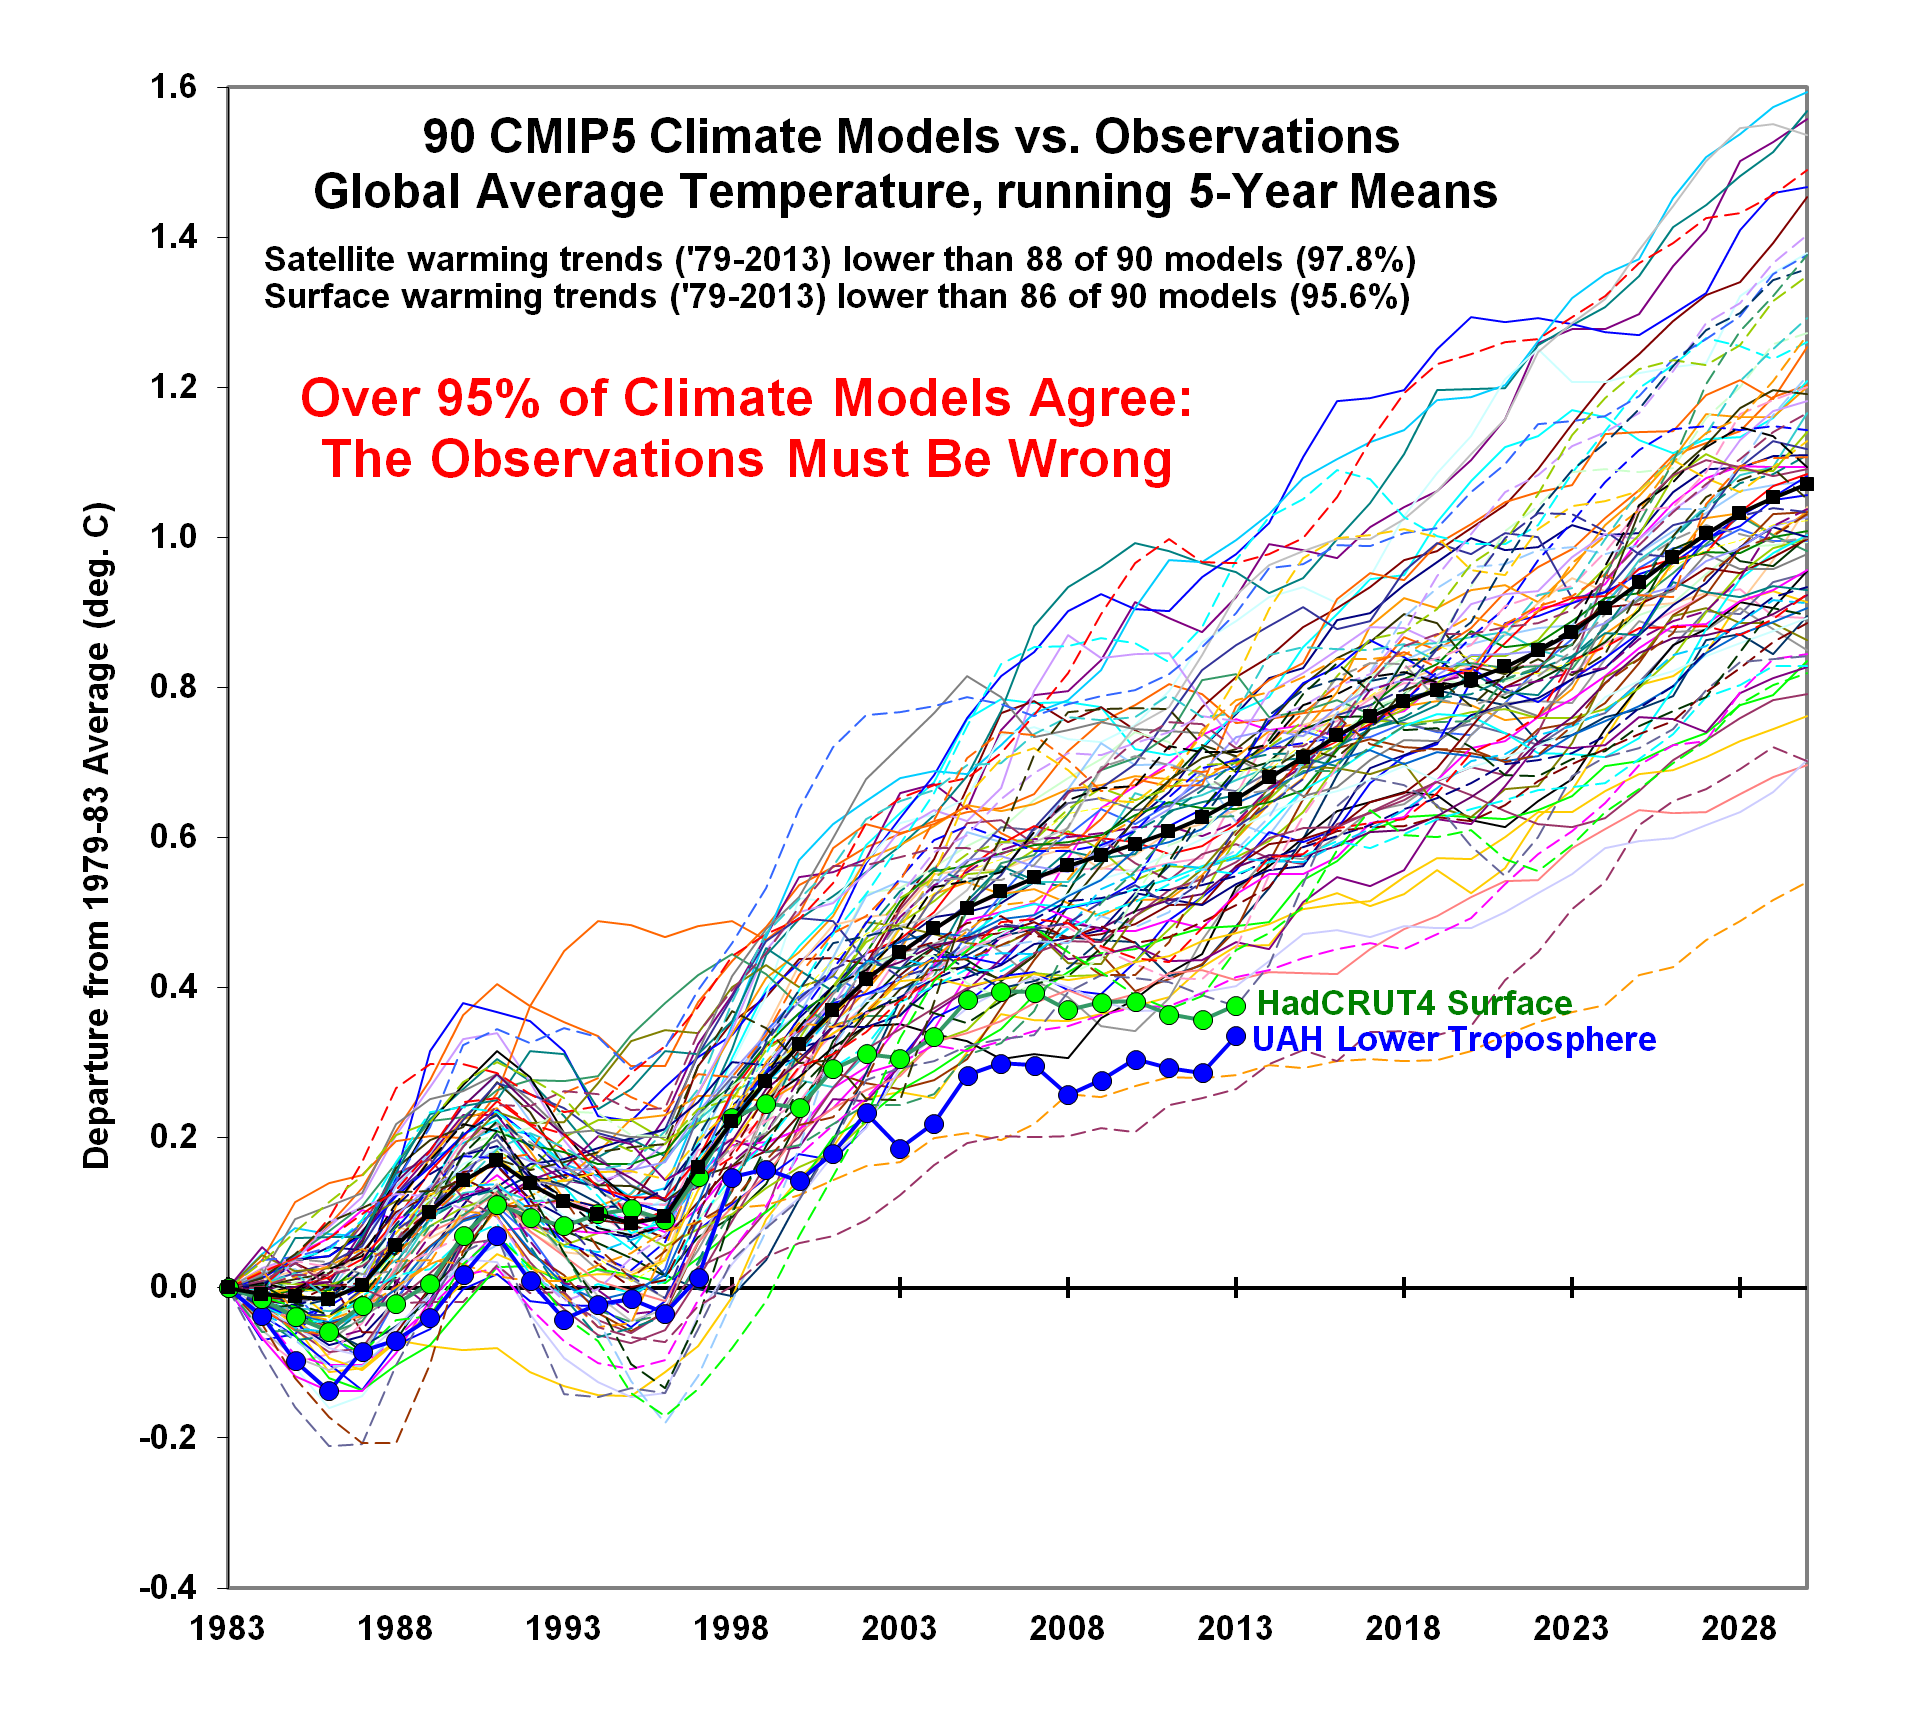 http://thefederalist.com/wp-content/uploads/2014/05/Climate-Model-Comparison.png